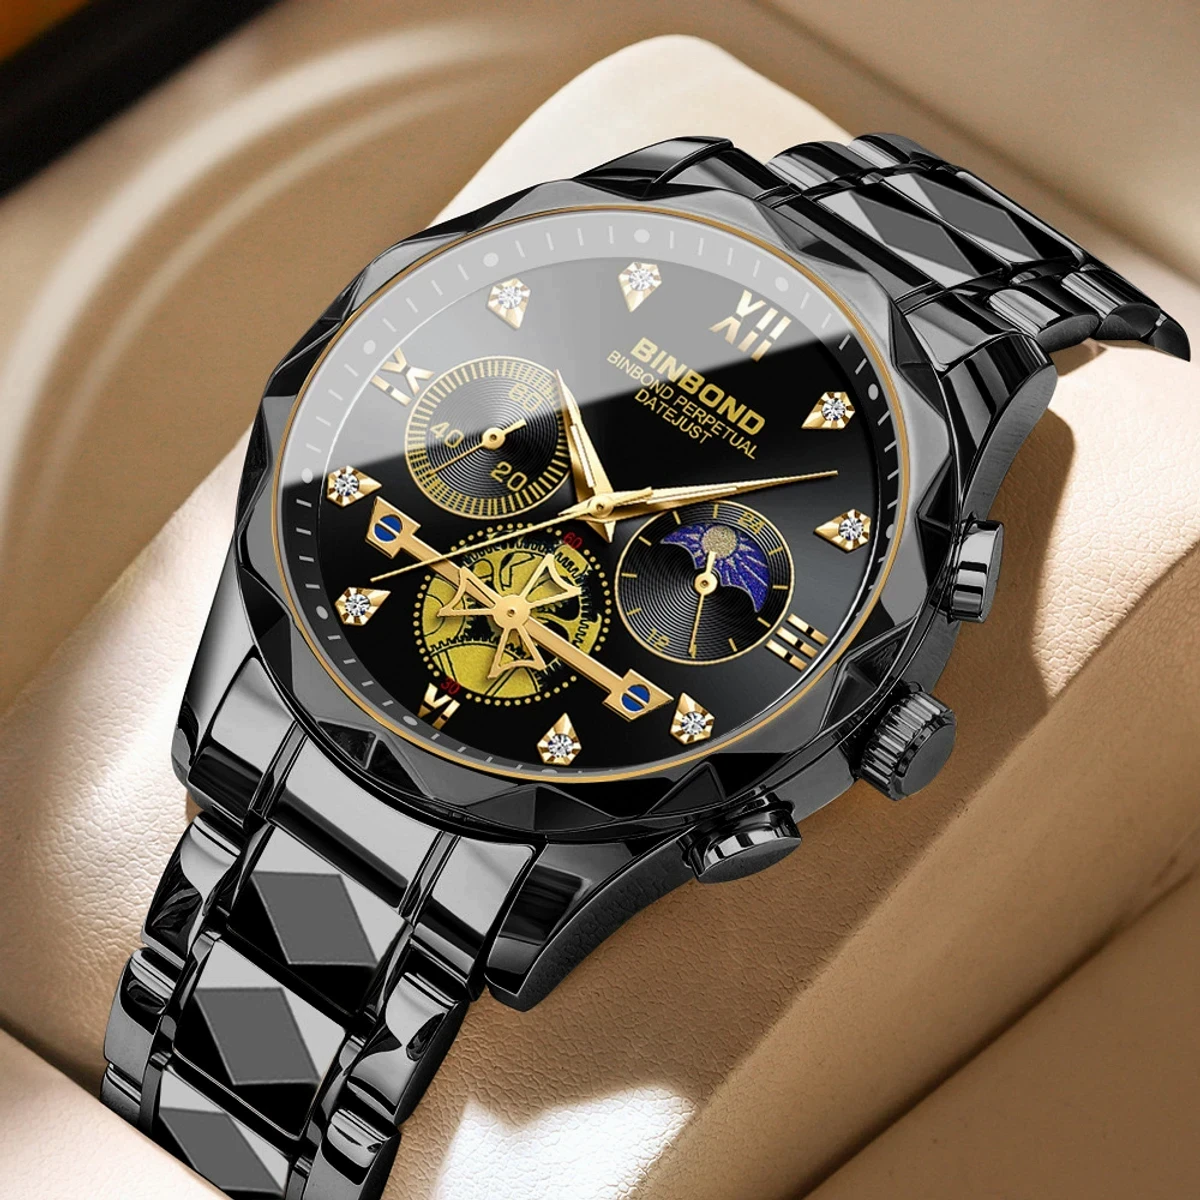 New Luxury Diamond Watch For Men Stainless Steel Waterproof Chronograph Wristwatches Full black